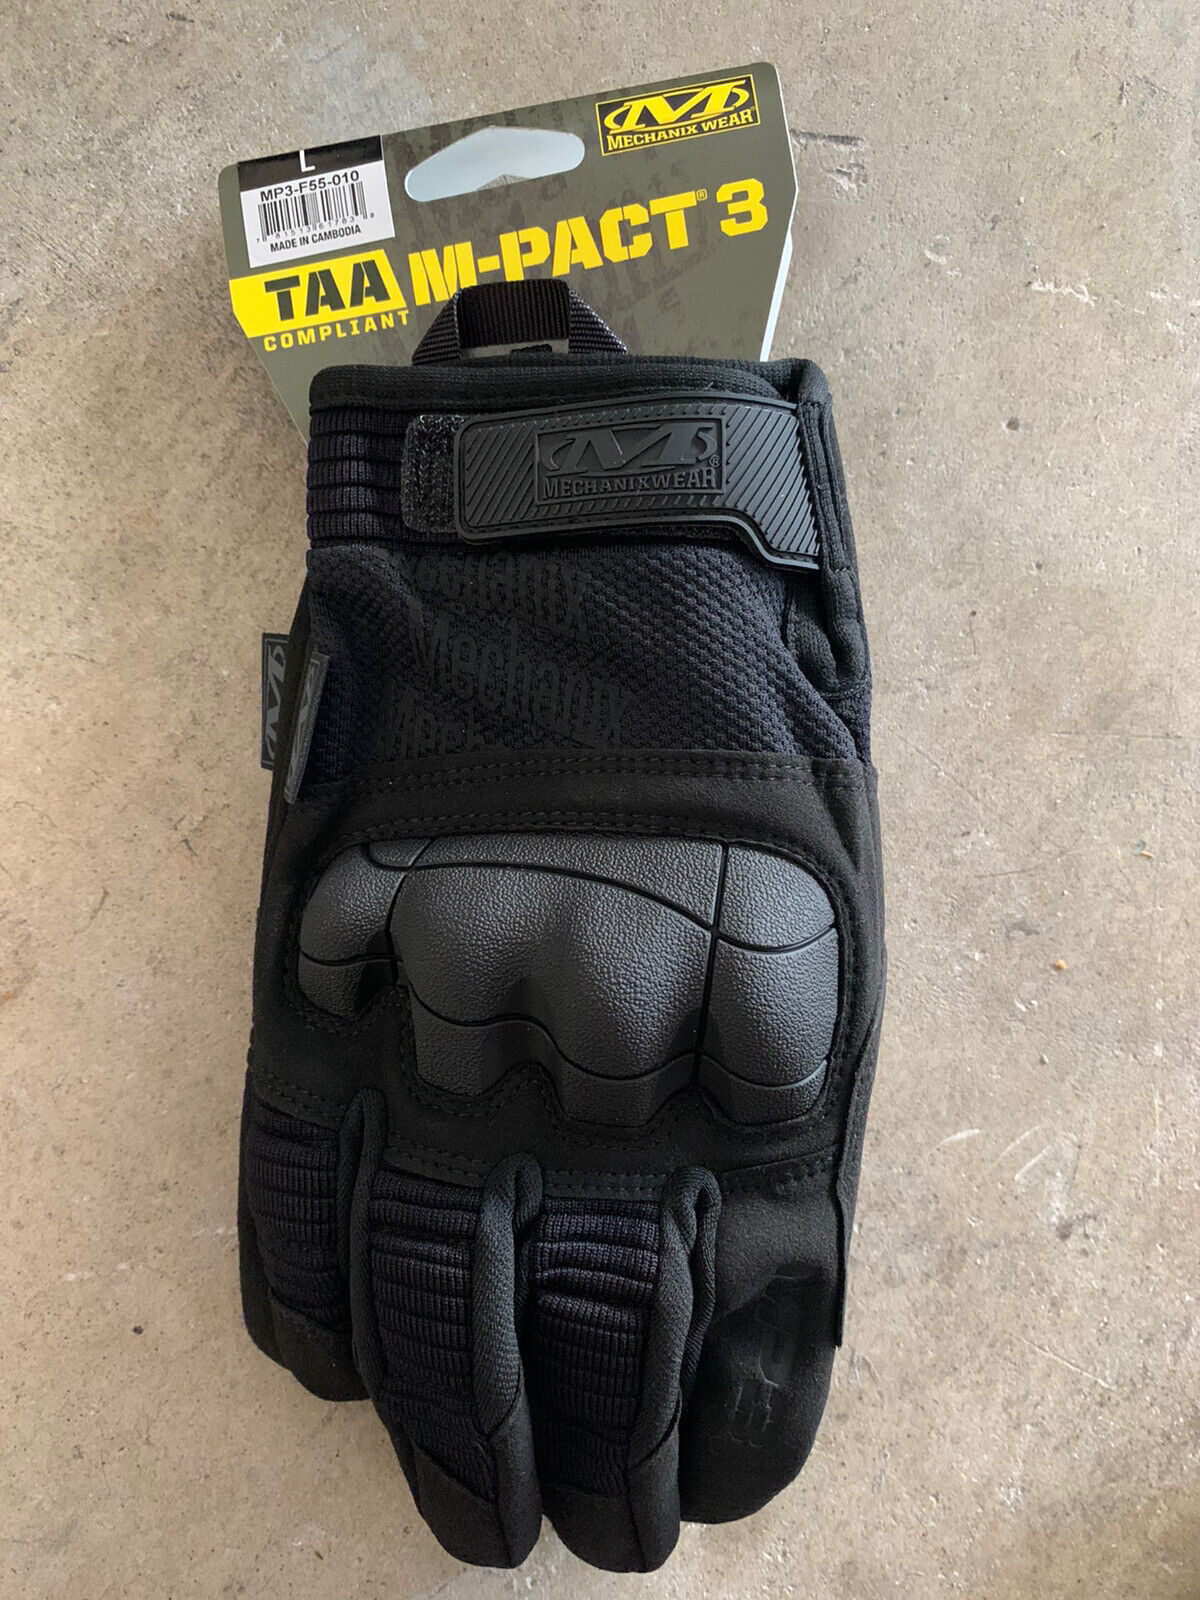 Large Mechanix M-Pact 3 Covert Tactical Work Gloves All Black.